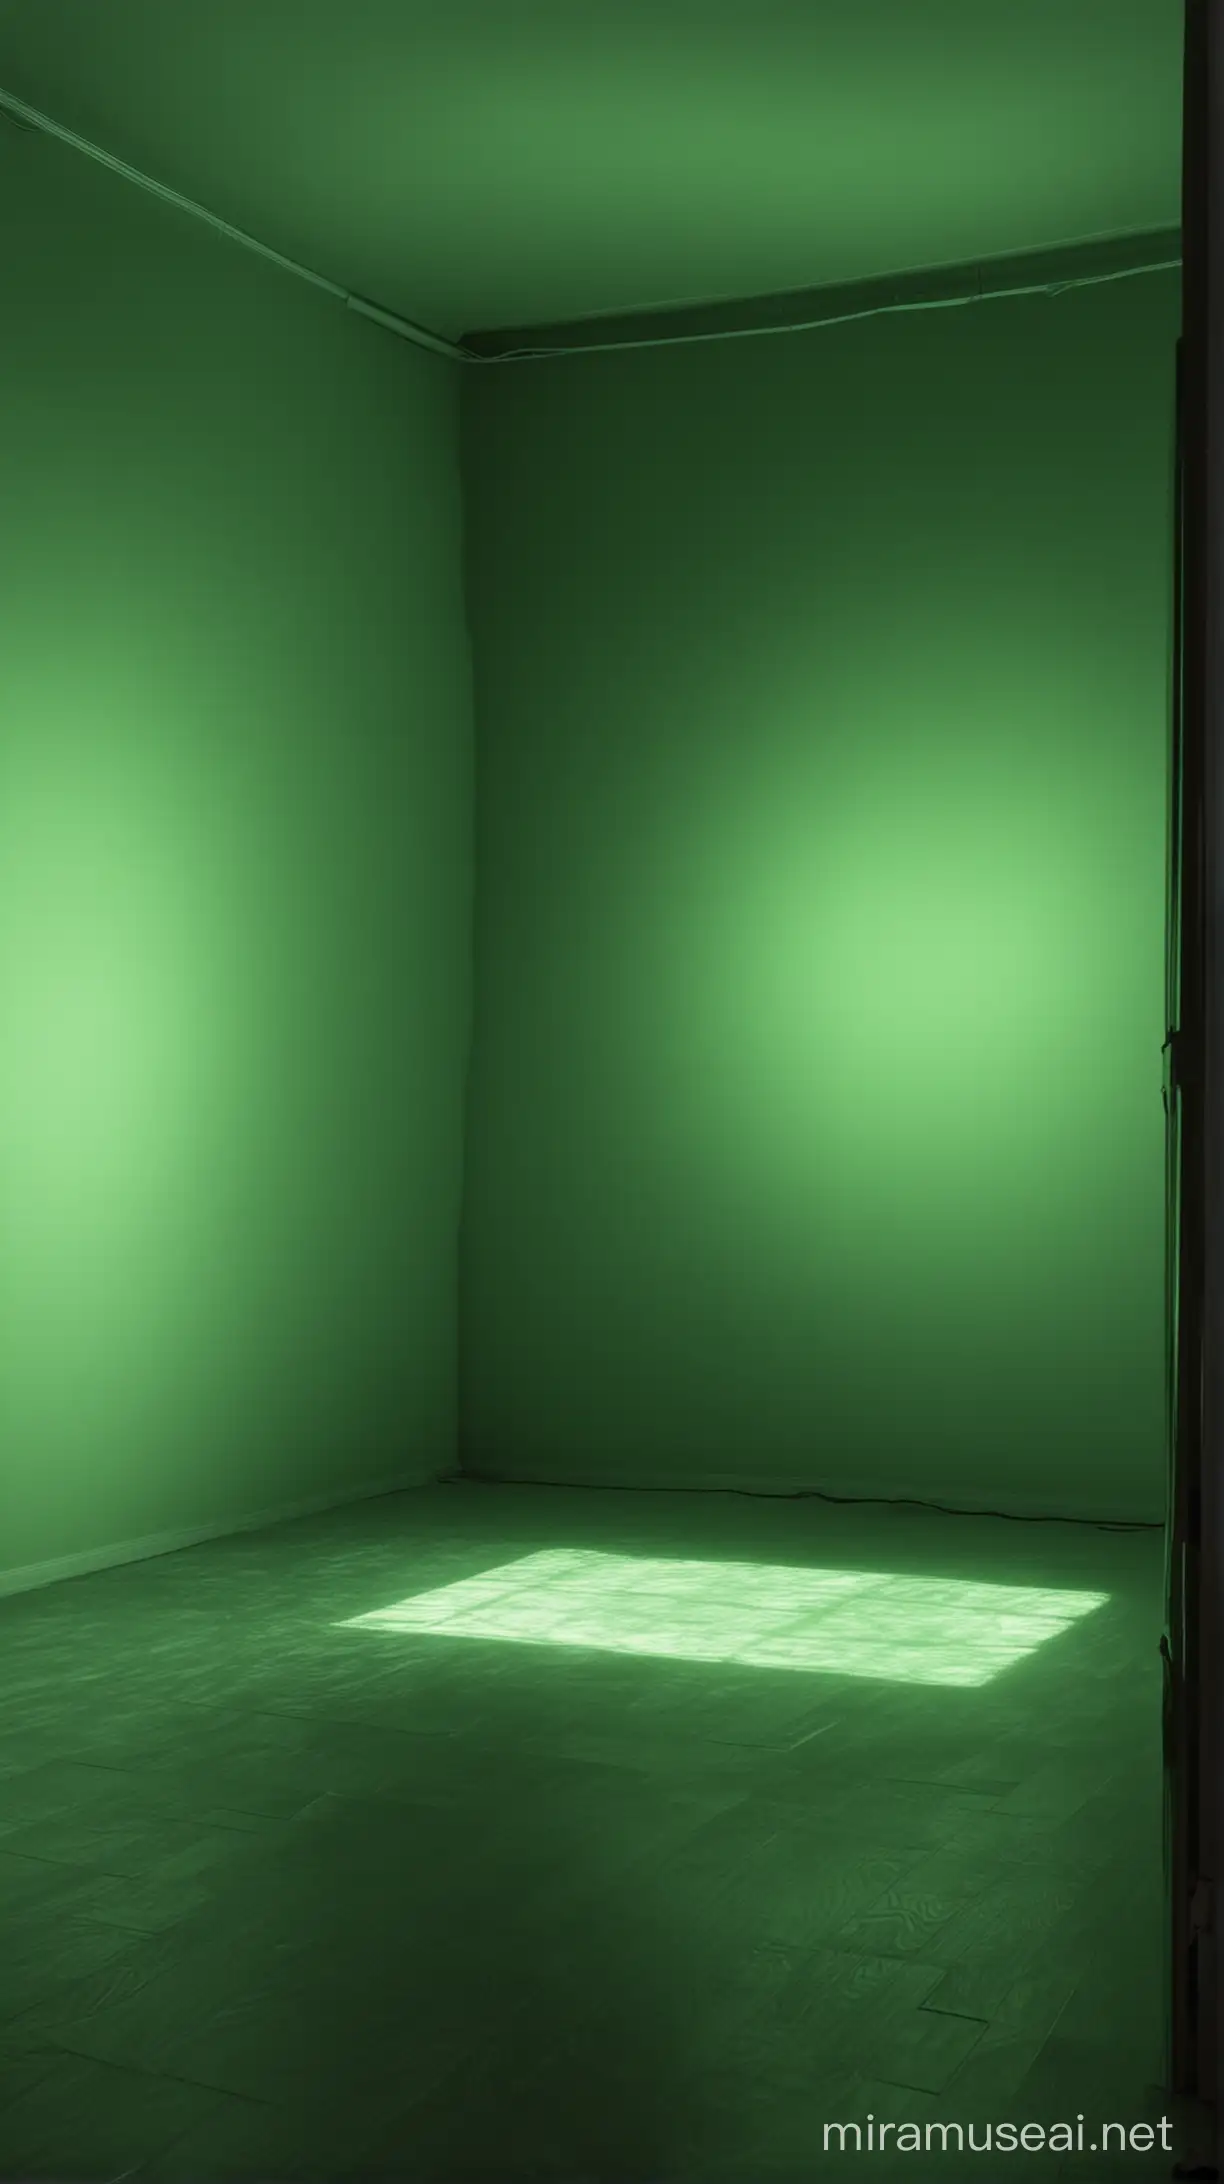 Create a realistic image of a room lit with monochromatic green light